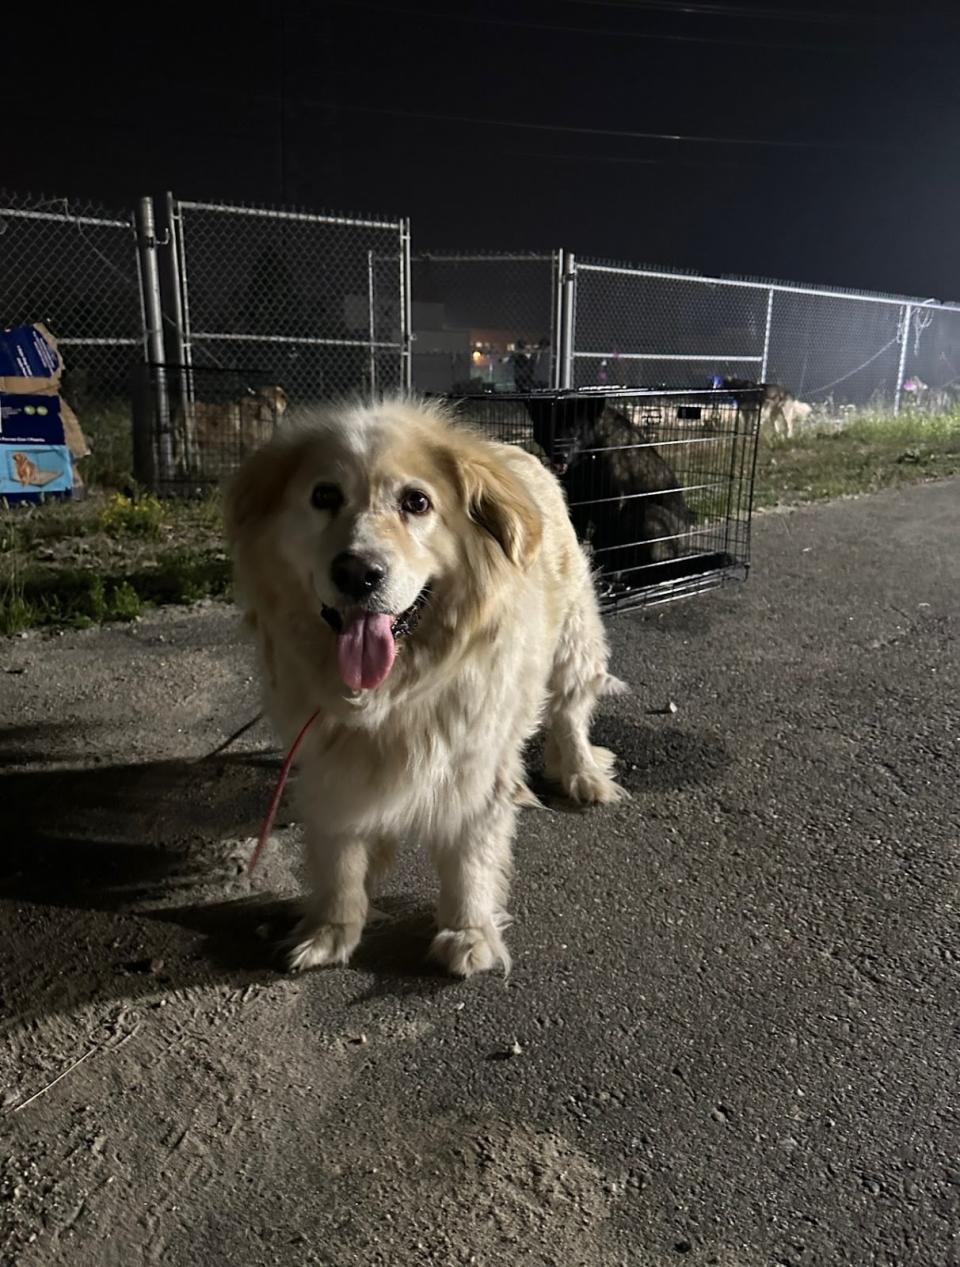 One of the 80 or so dogs who had to be left behind when their owners were told to evacuate Eastmain. Three people took care of them for days. (Submitted by Marilyn Tomatuk - image credit)